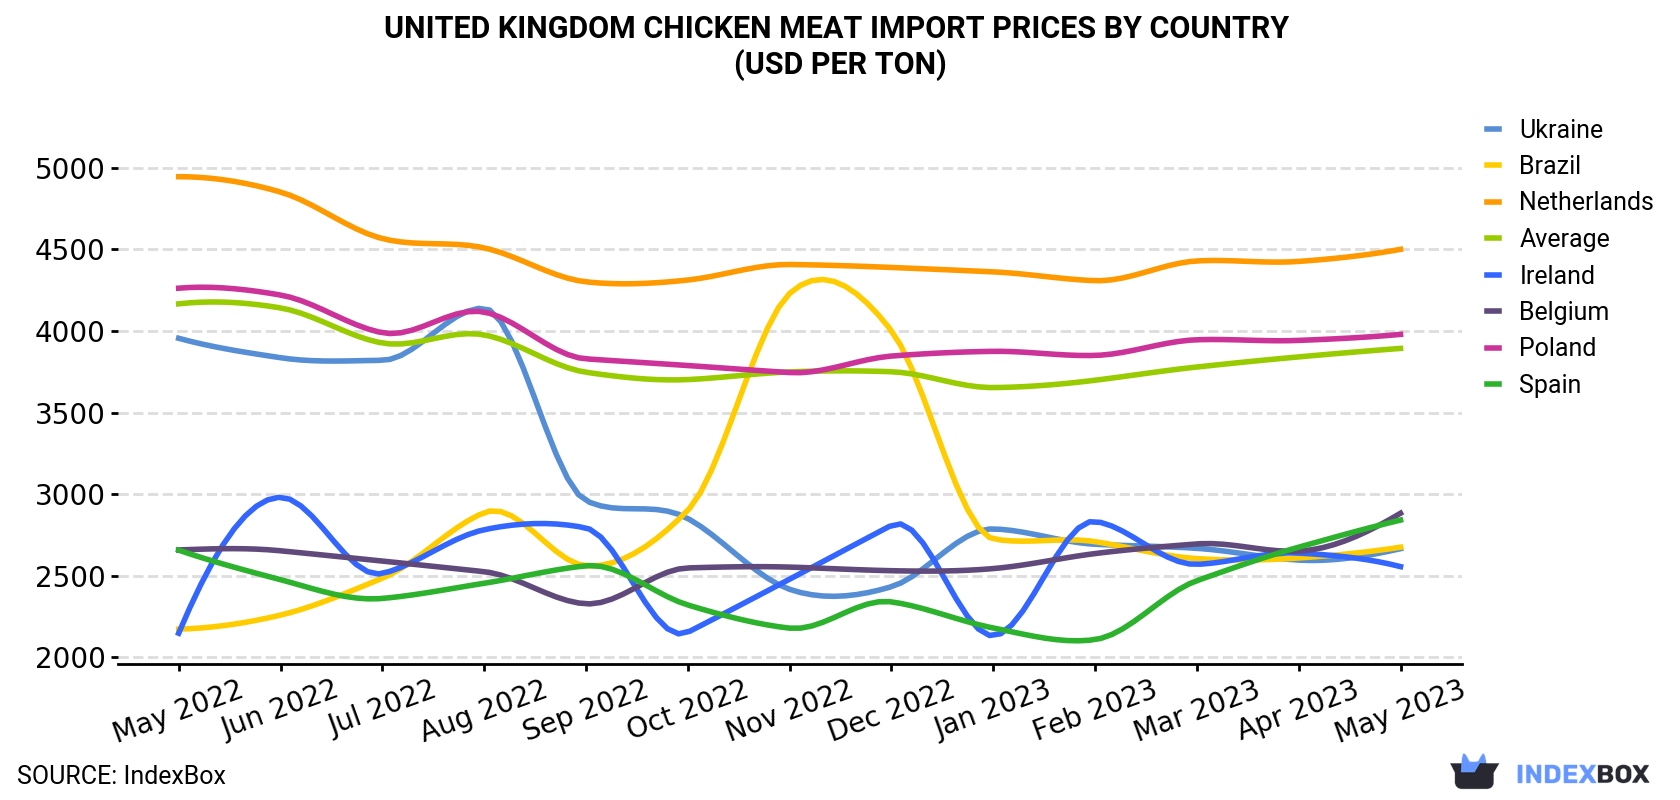 United Kingdom Chicken Meat Import Prices By Country (USD Per Ton)